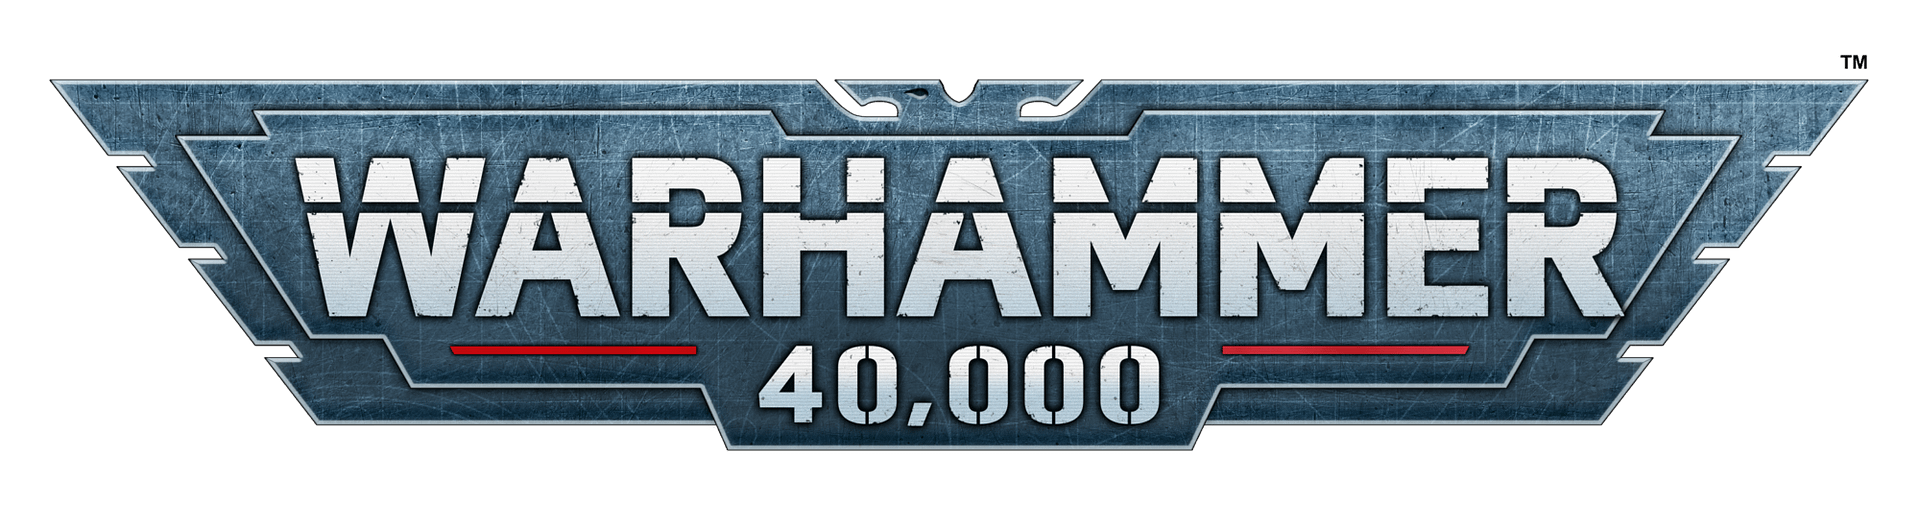 Warhammer 40,000: Games Workshop Announces 9th Edition Rules